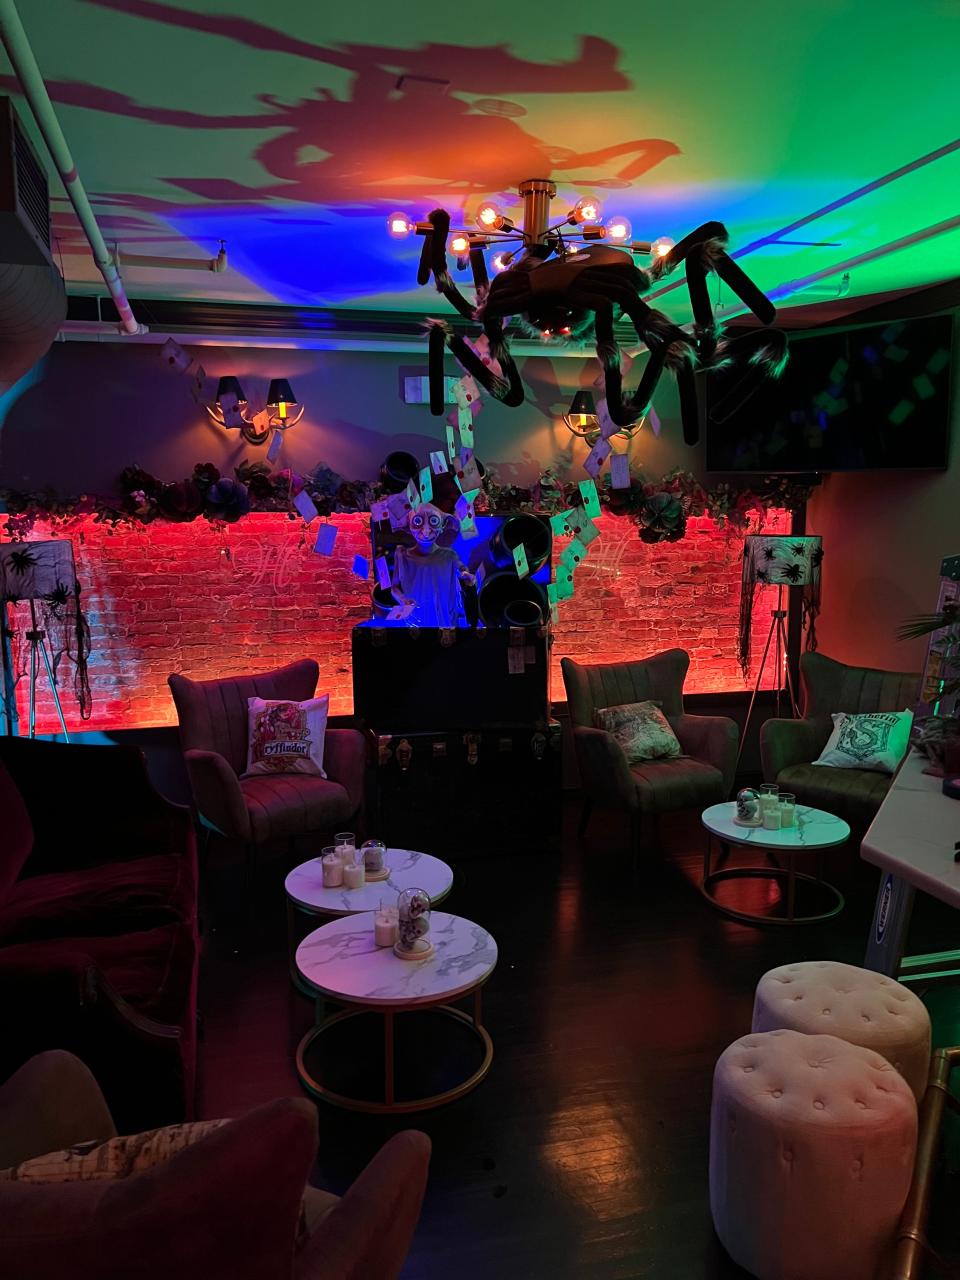 The Sorcery Lounge pop-up bar from November at Newark's Hamilton On Main will be updated for December with a holiday twist.